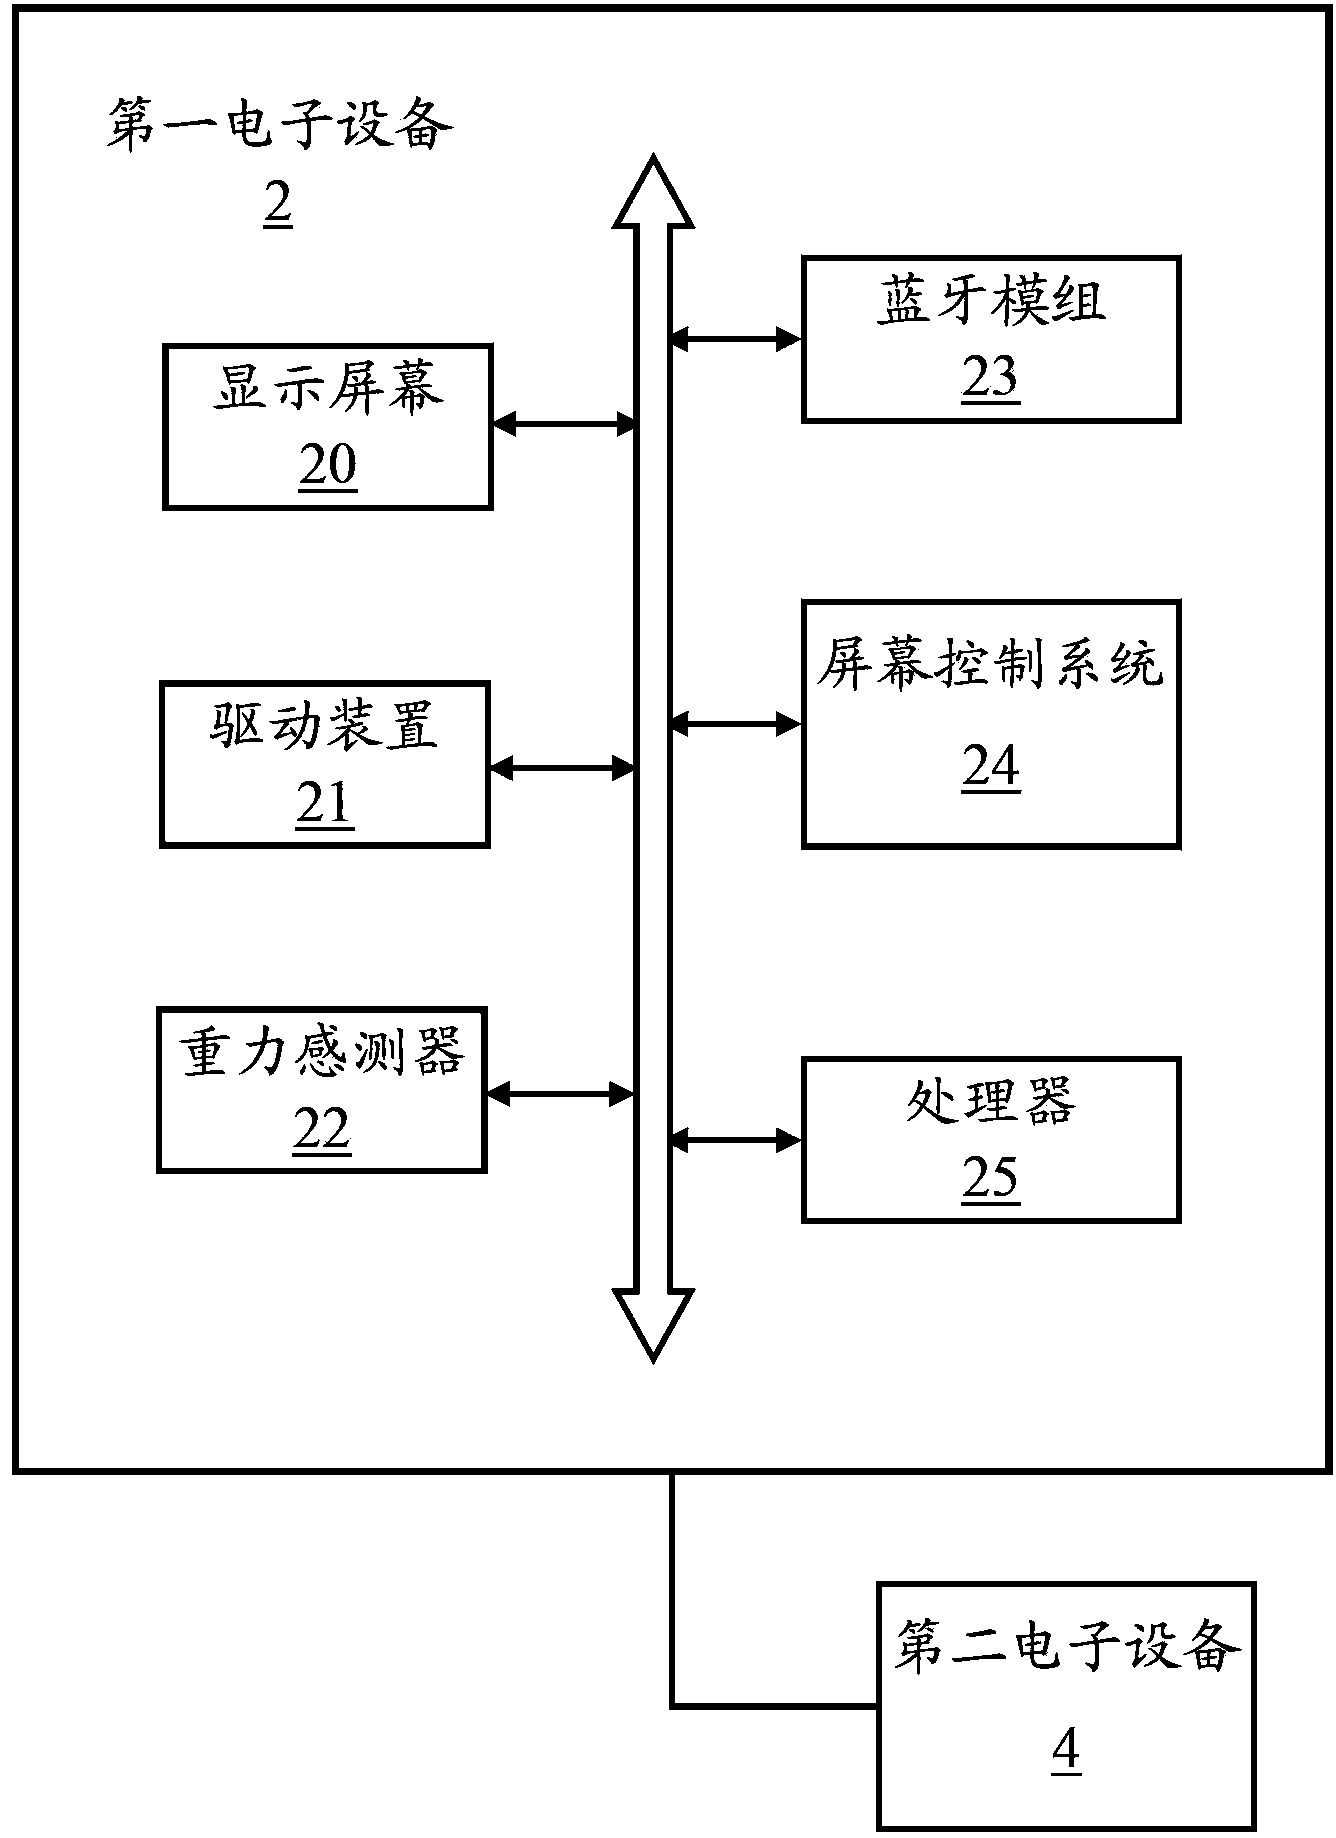 Screen control system and method